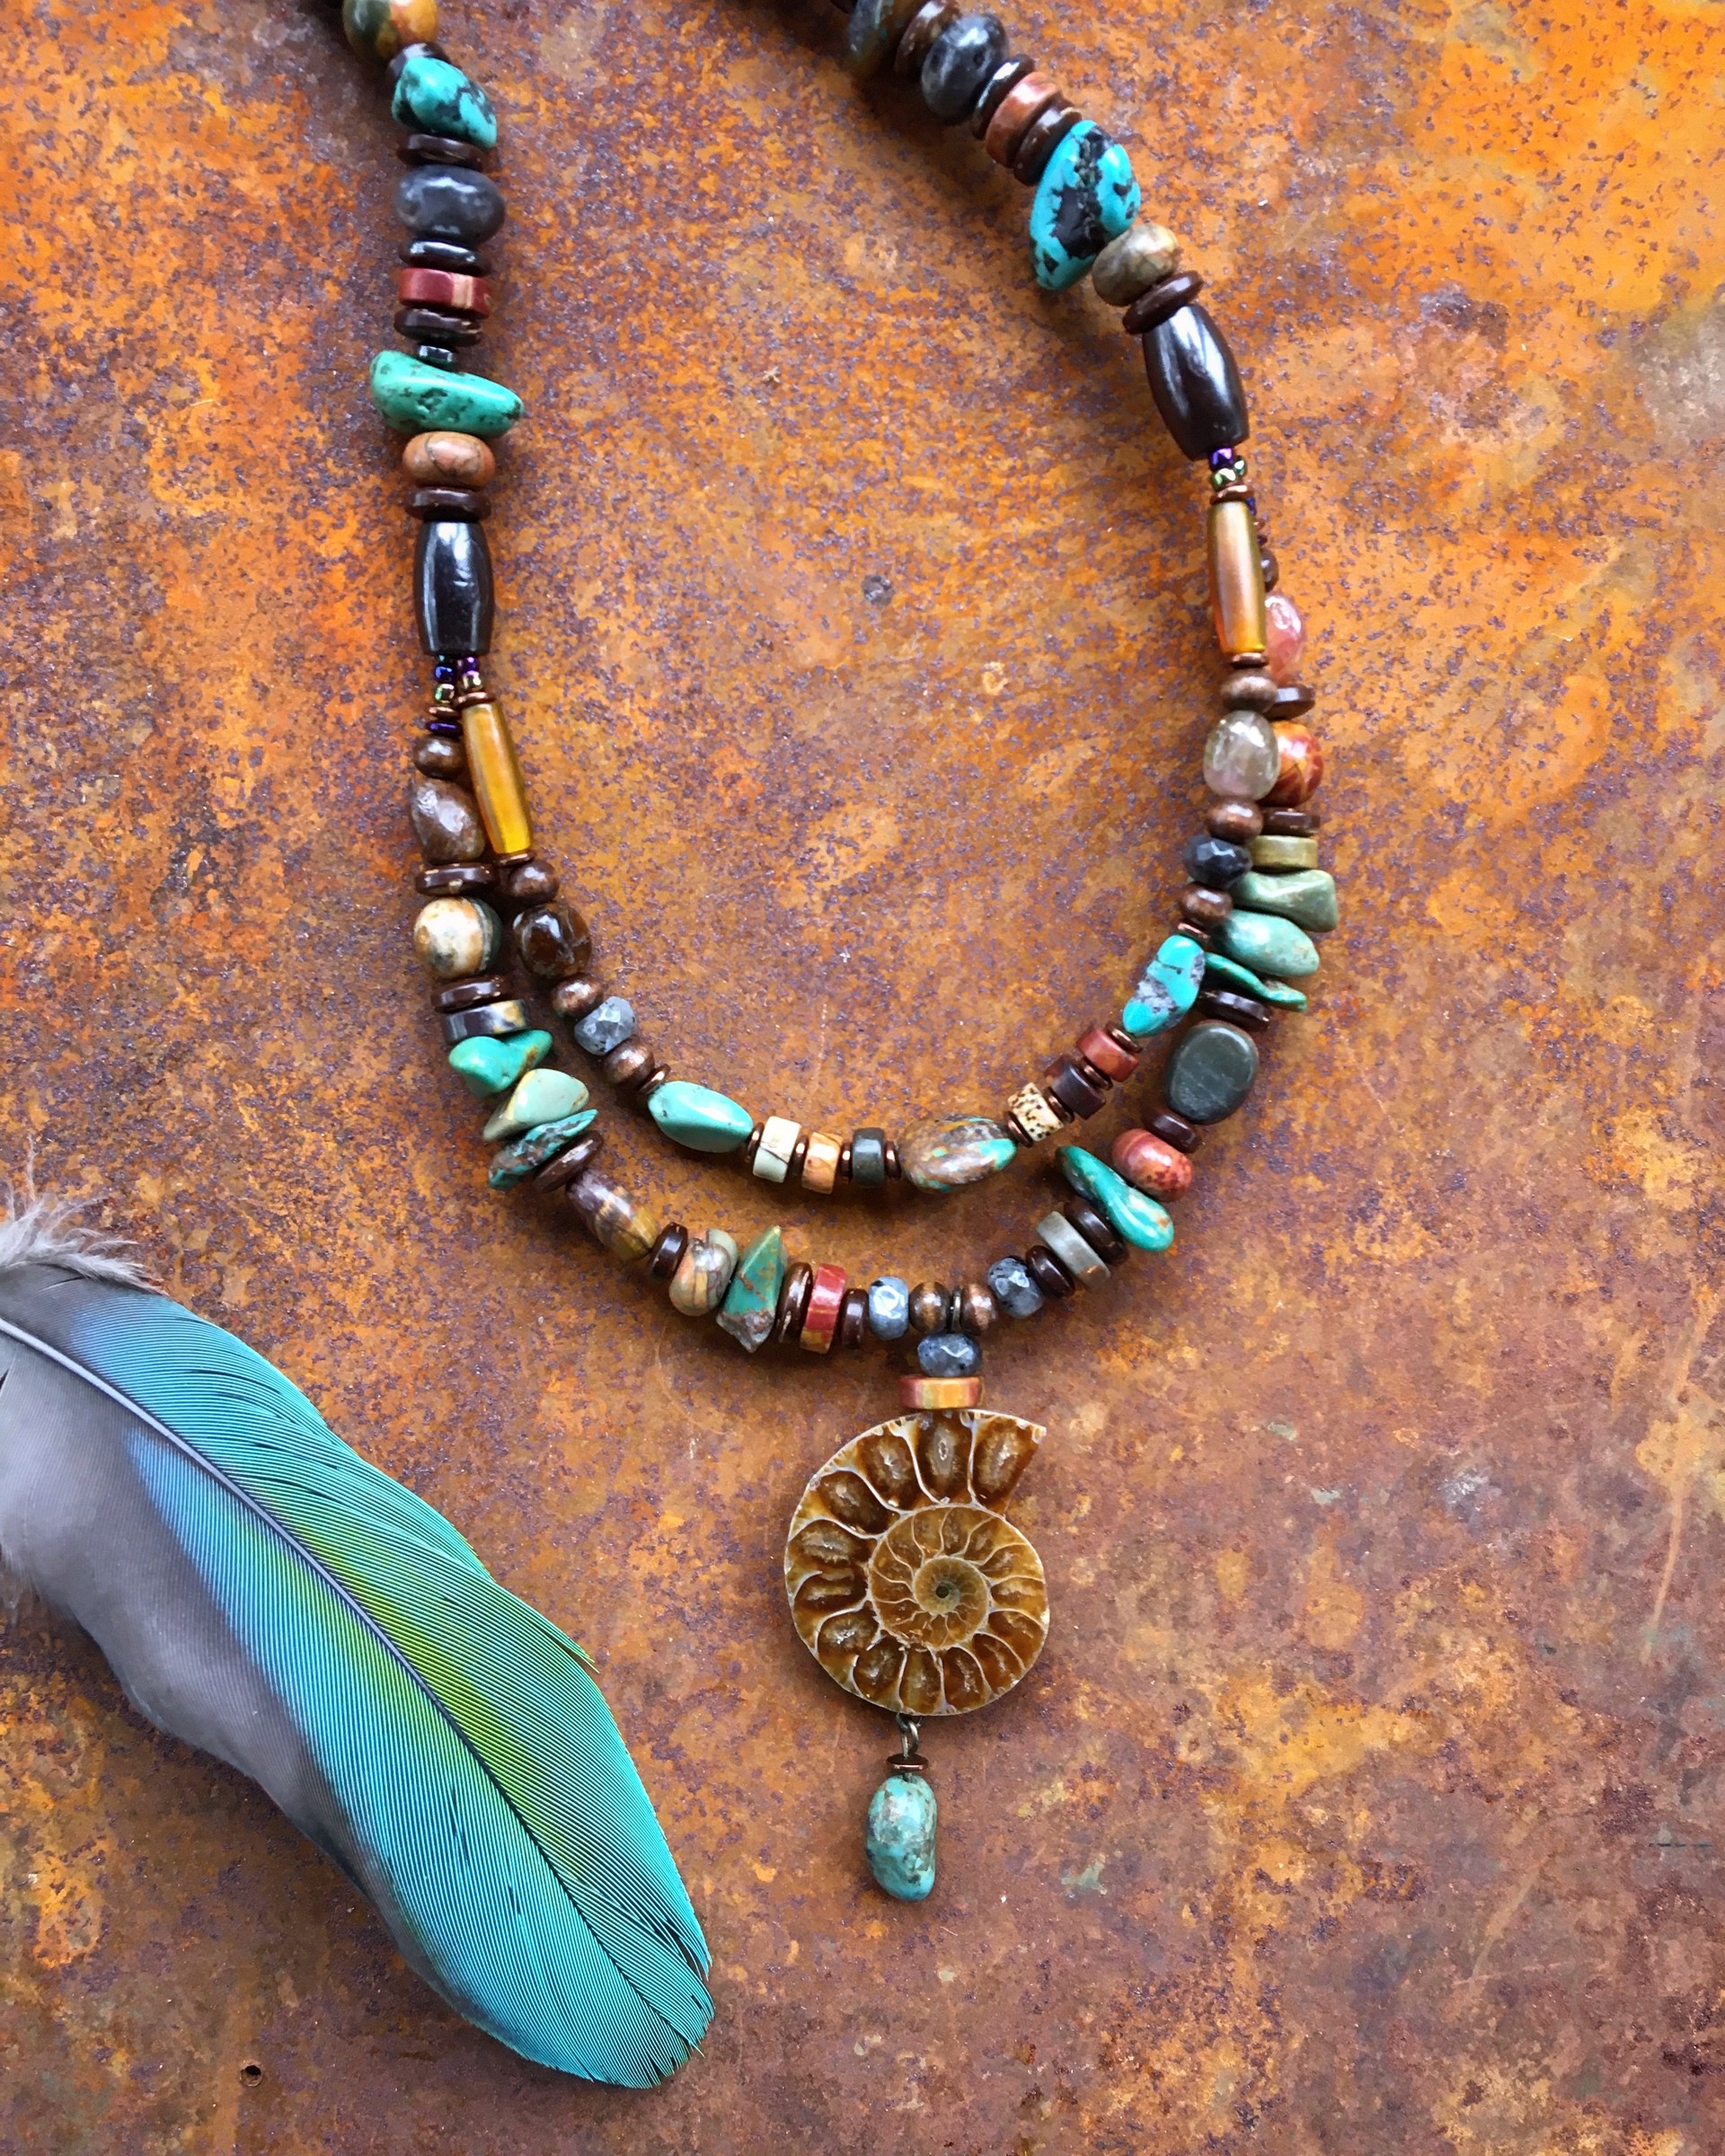 K380 Double Strand Ammonite Necklace with Turquoise Stone by Kelly Ormsby